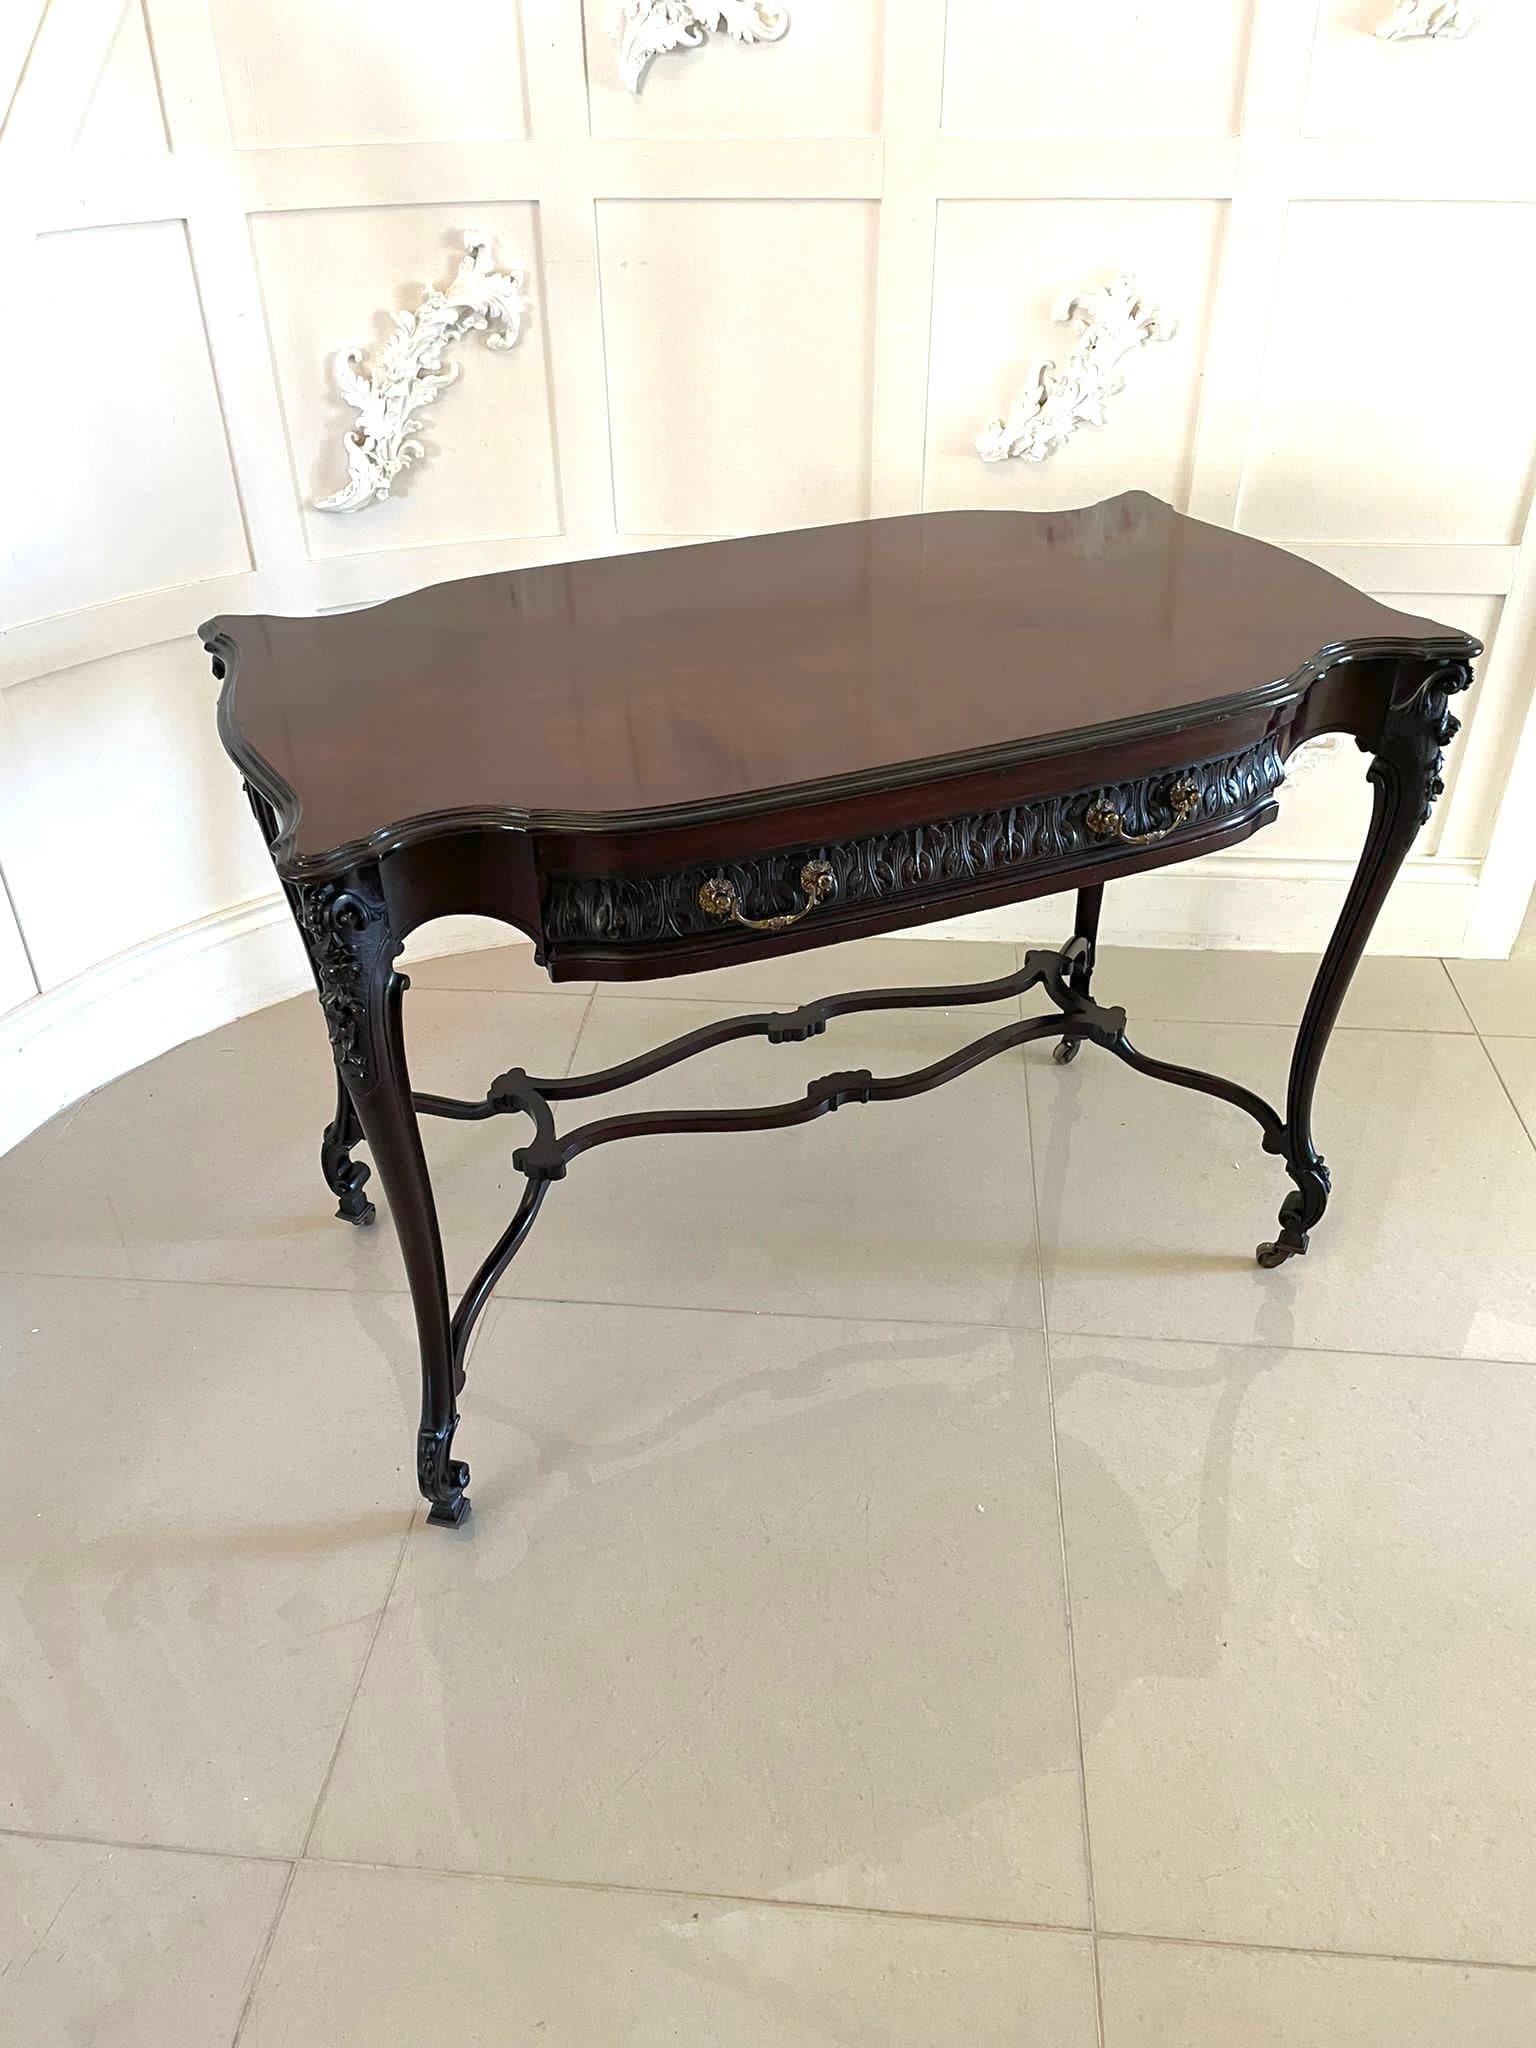 Outstanding quality antique Victorian carved mahogany freestanding centre table having a quality shaped mahogany top with a moulded edge above one long drawer with fantastic quality carving and original brass handles, freestanding carved back and